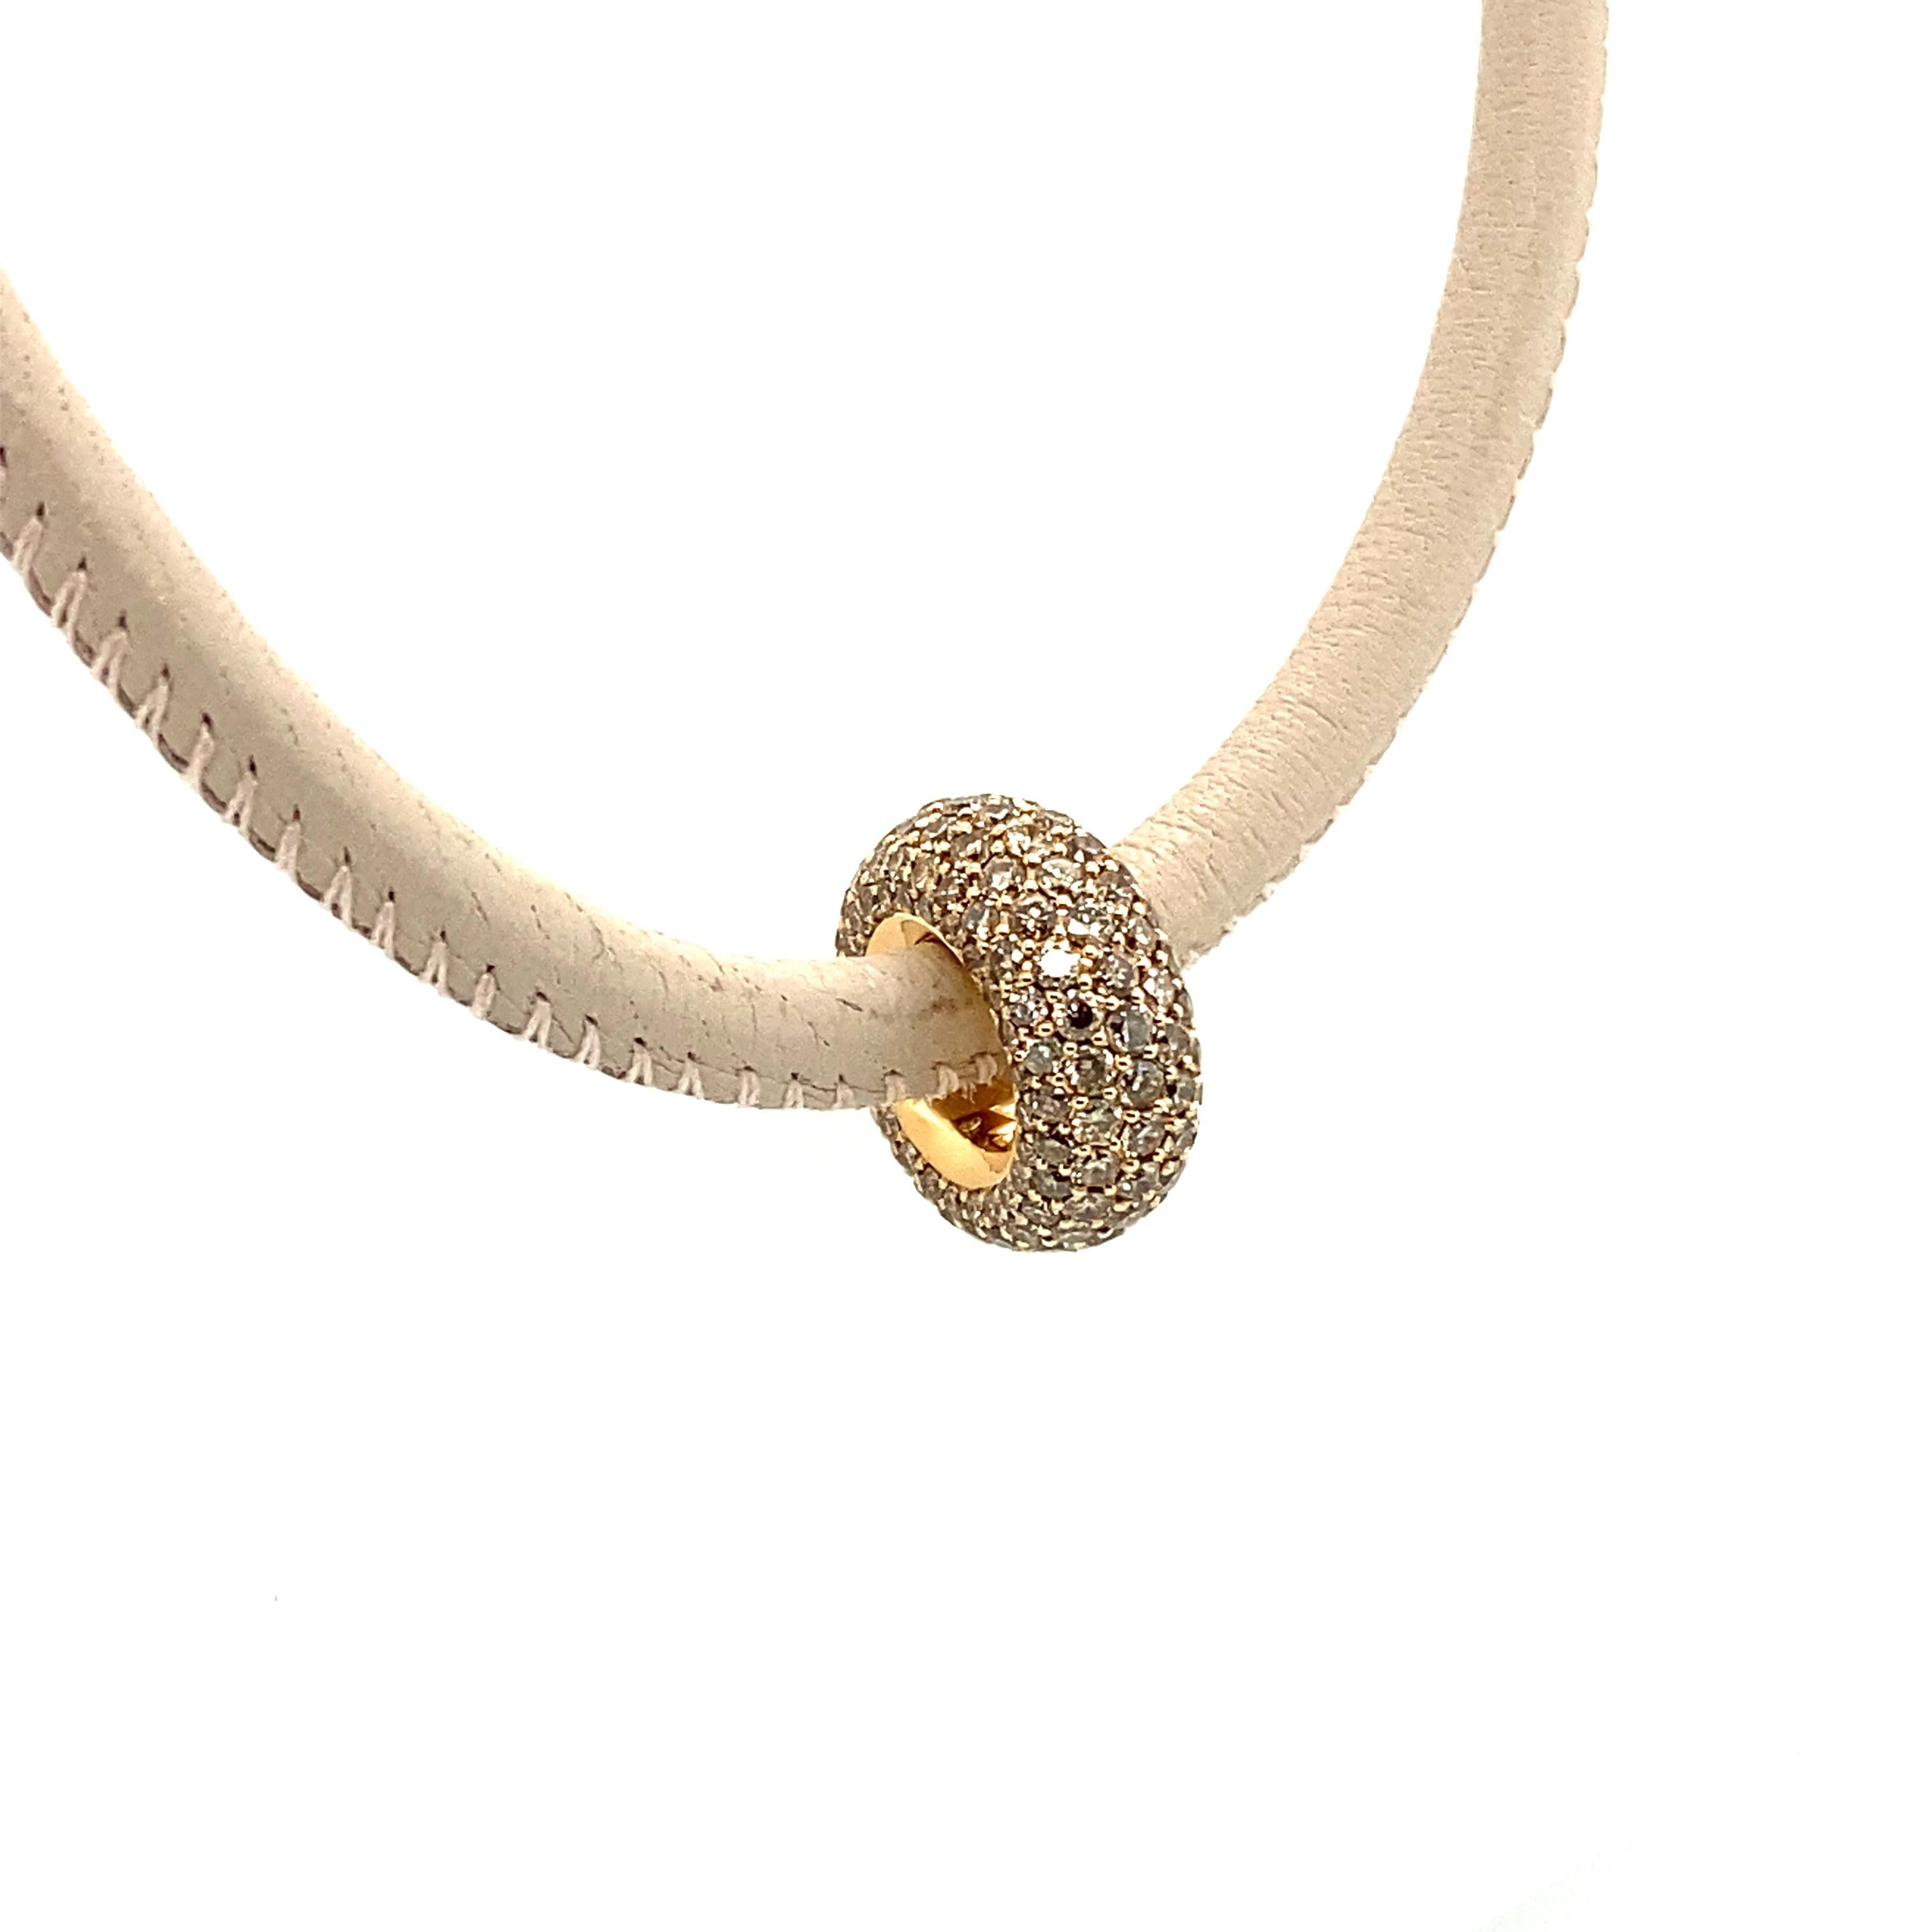 This sporty necklace by jeweller NOOR from Pforzheim combines fine craftsmanship with modern design. The 18 karat rose gold ring is carefully prong-set with 175 brilliant-cut diamonds of champagne colour and vs clarity with a total weight of 2.37